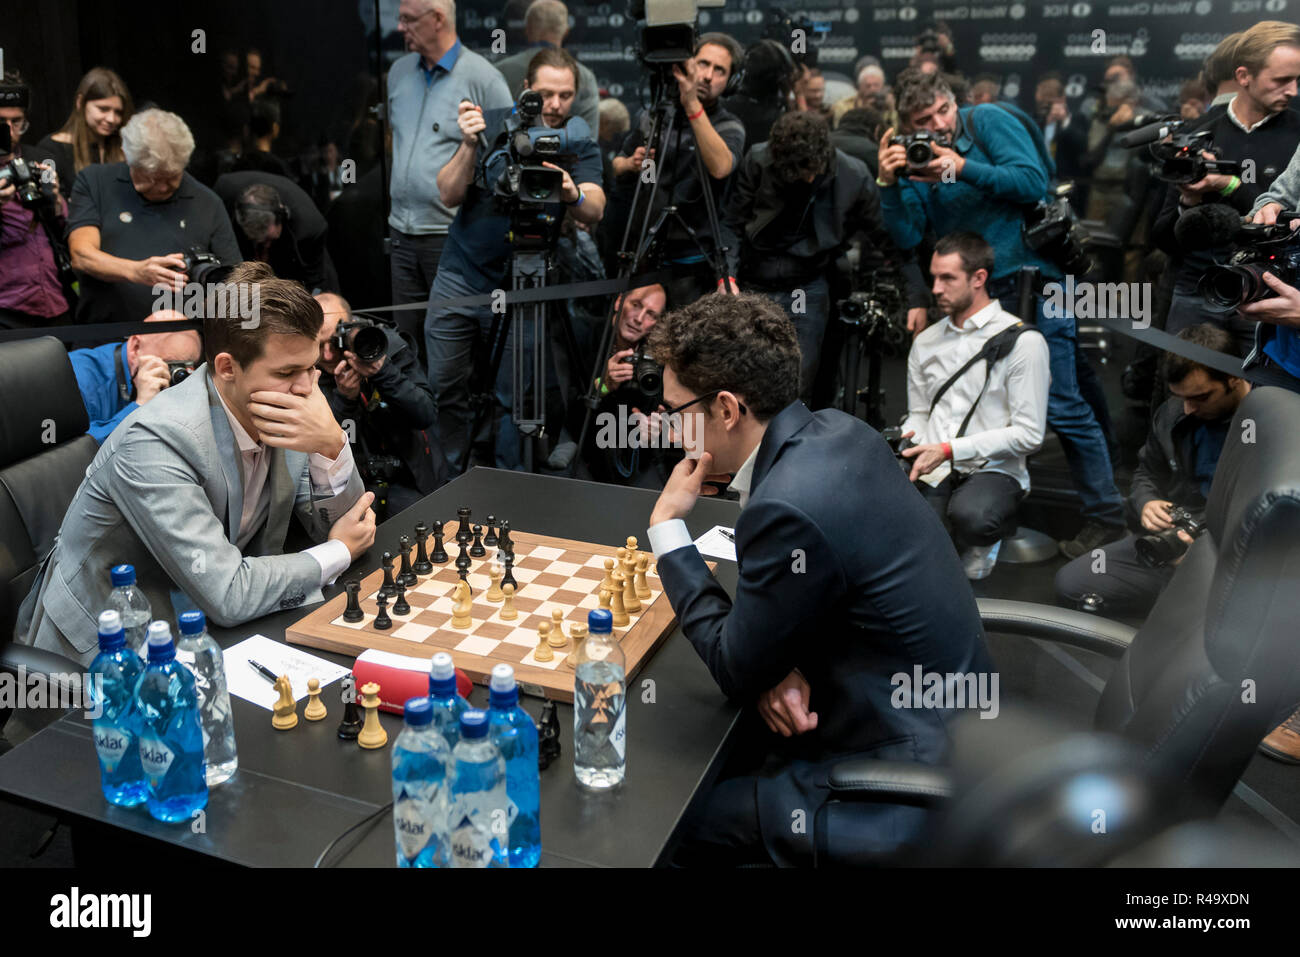 Caruana: When we spoke to Kramnik he estimated that 25% of titled